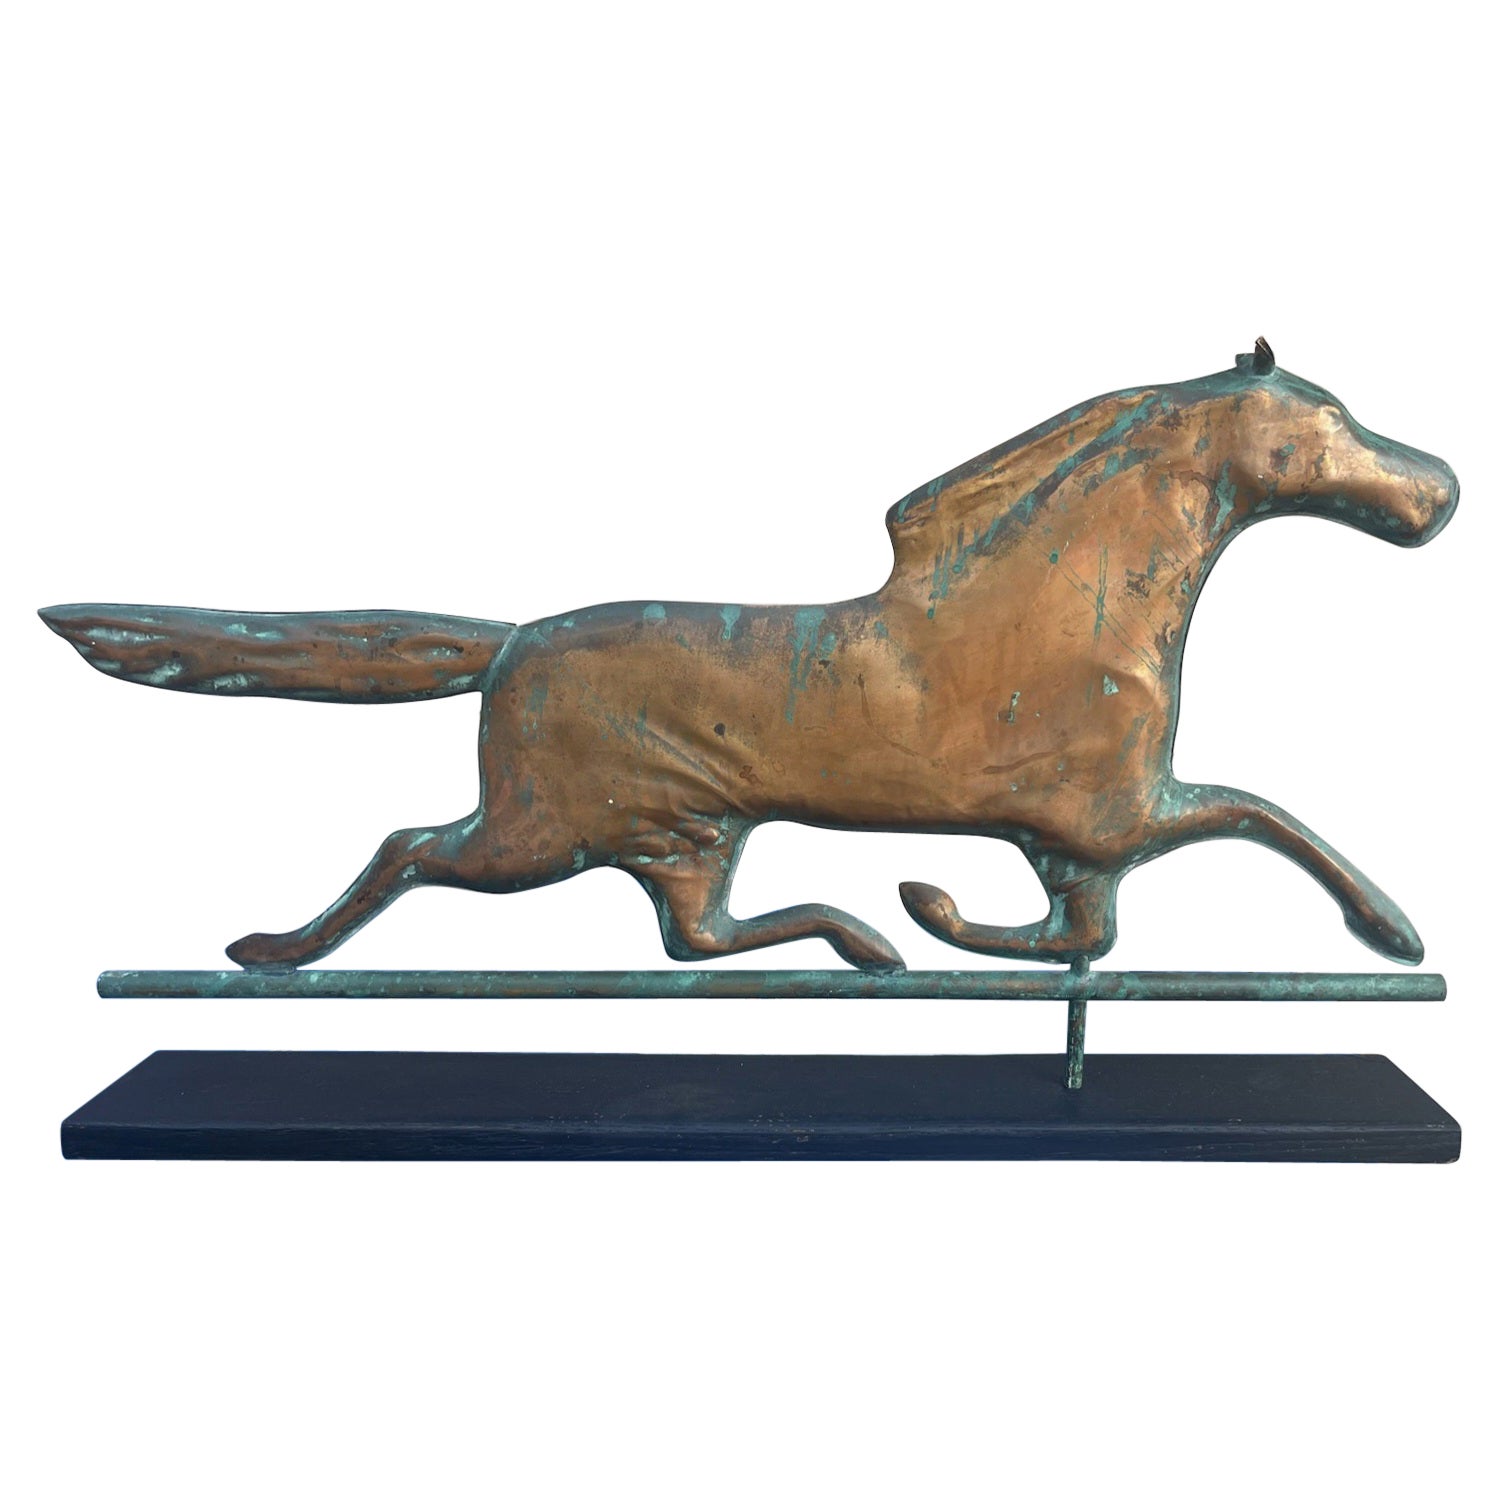 This early 20Thc Full body copper running horse weather vane has a wonderful aged patina and surface. It comes with a custom made black wood painted stand.The condition is very good.